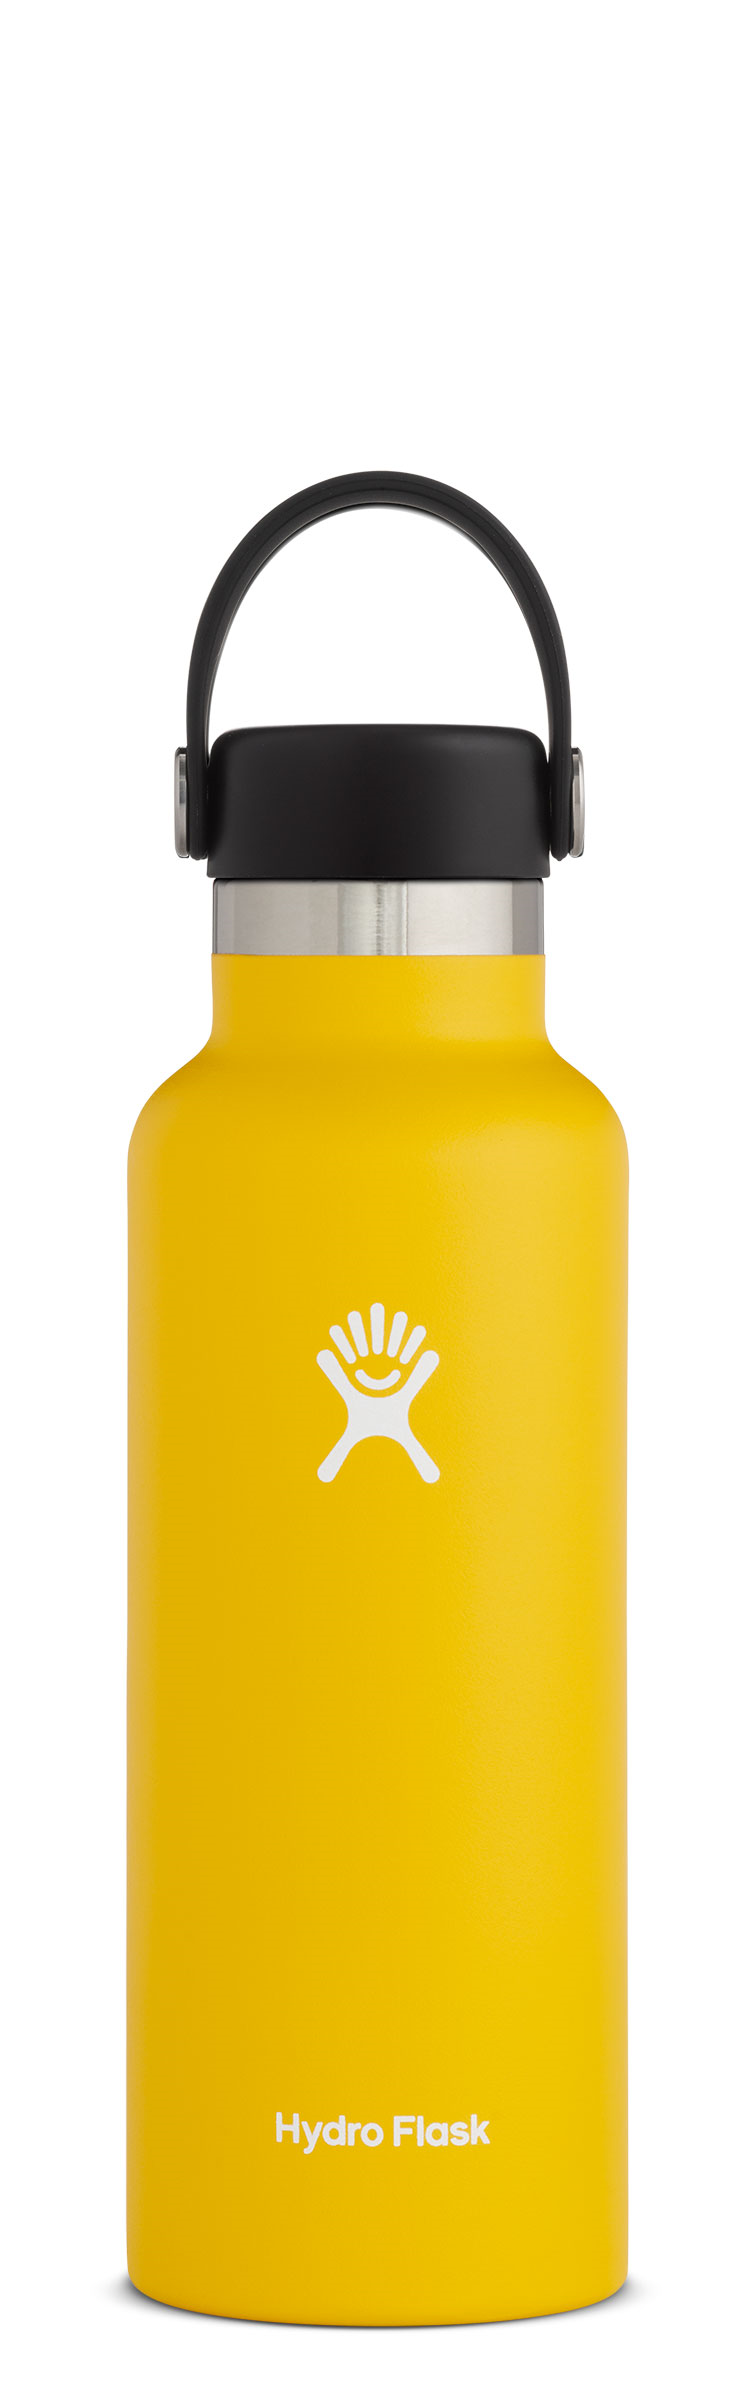 Hydro Flask 18oz Standard Mouth - Review & Test 